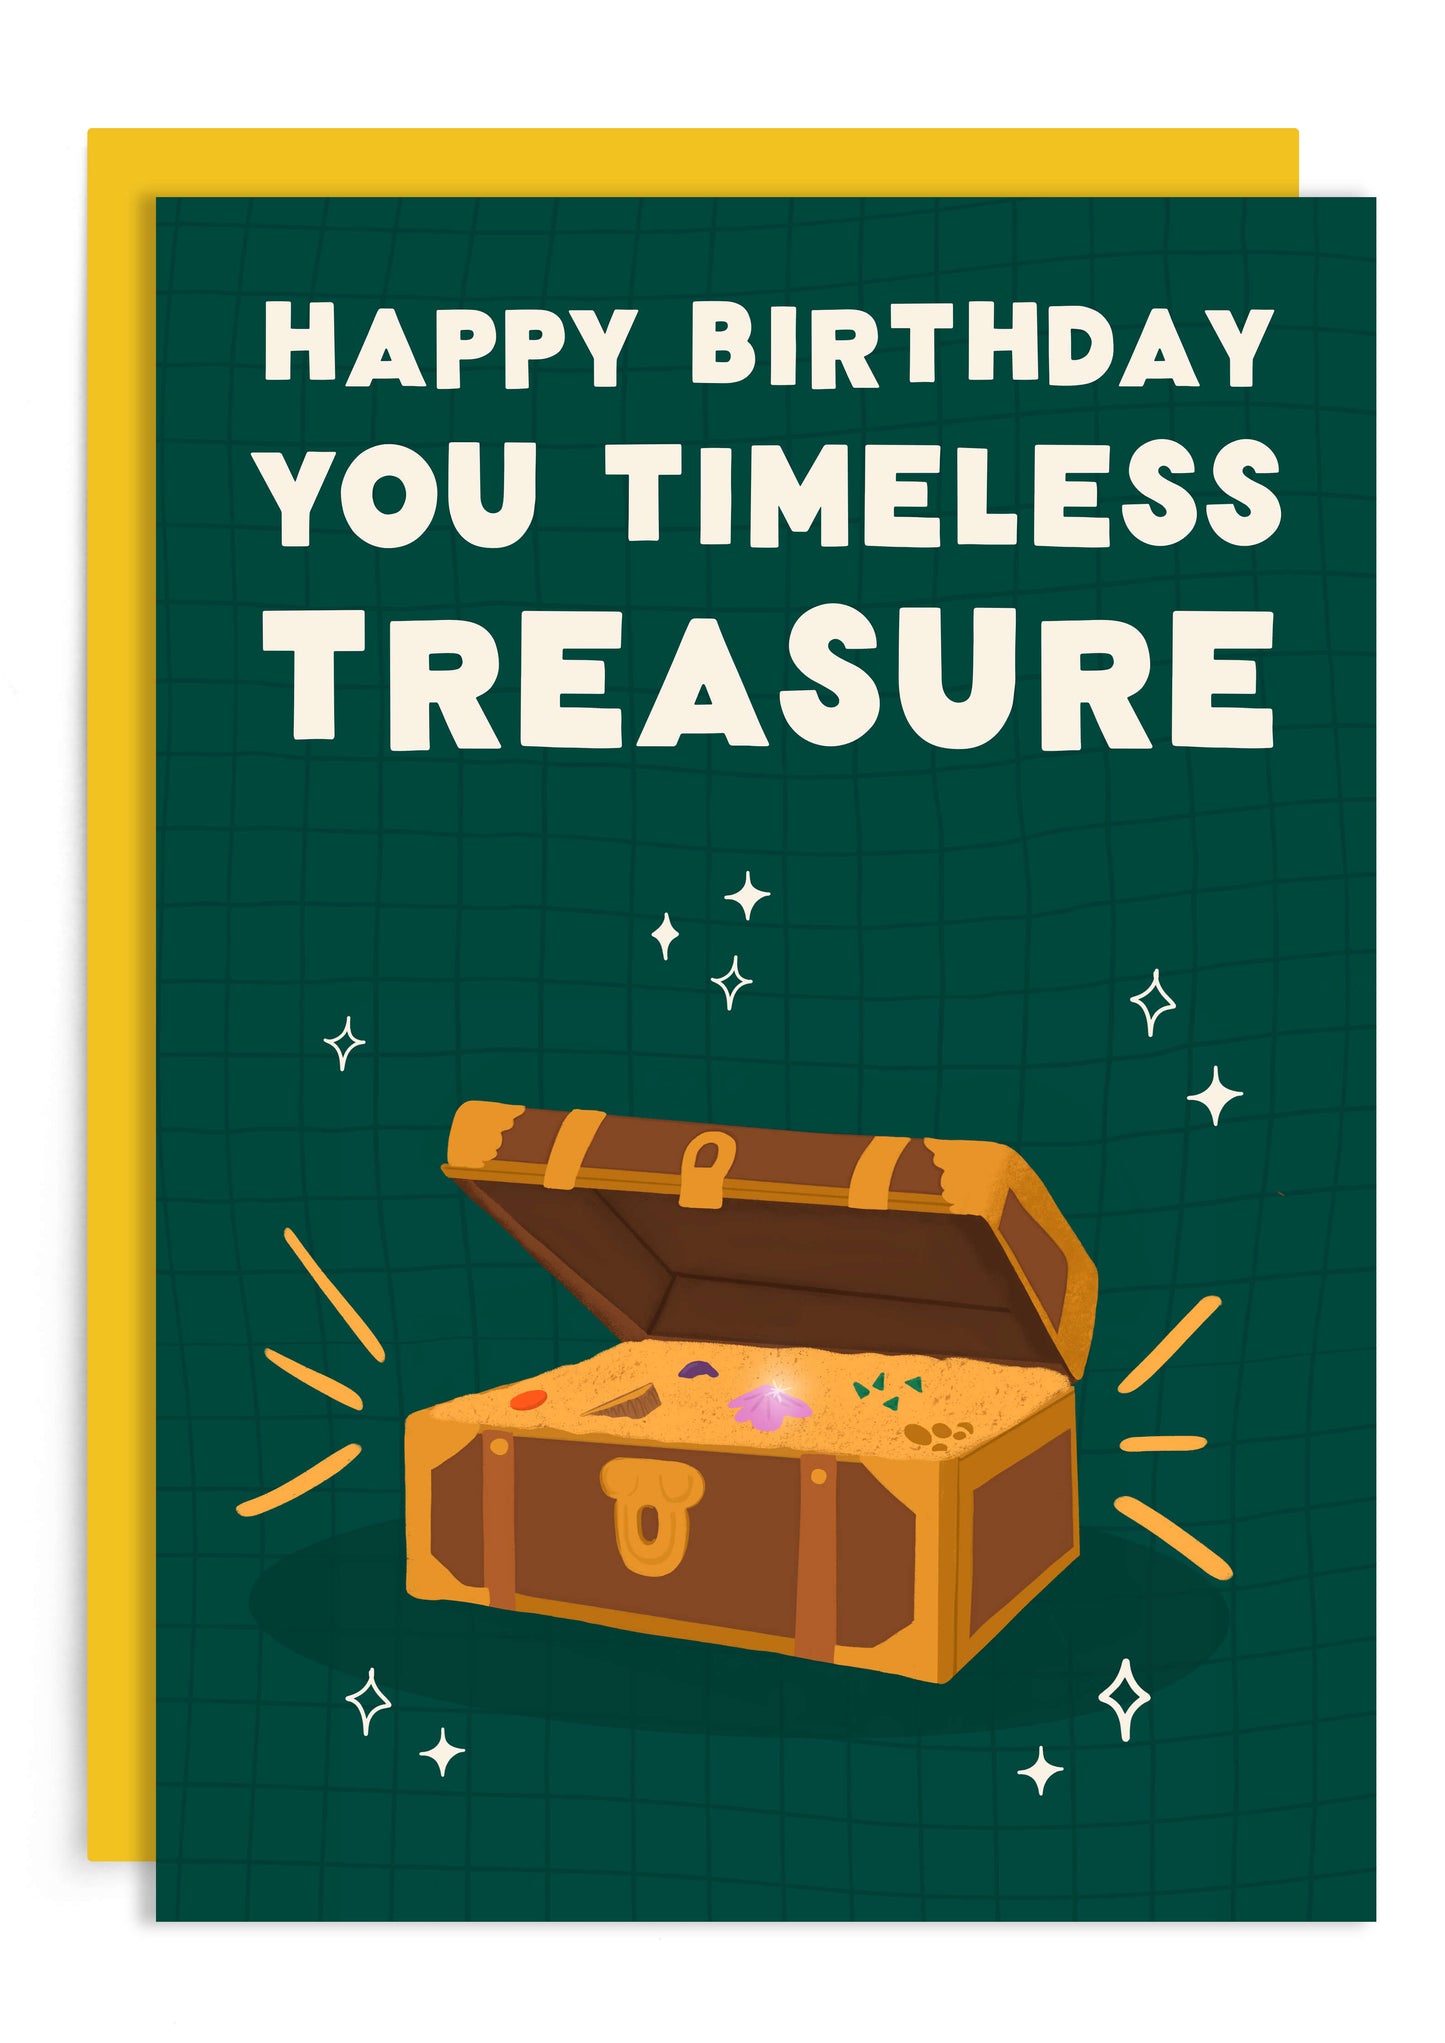 Timeless Treasure Birthday Card | All Ages Birthday Cards | Age Joke Birthday Card